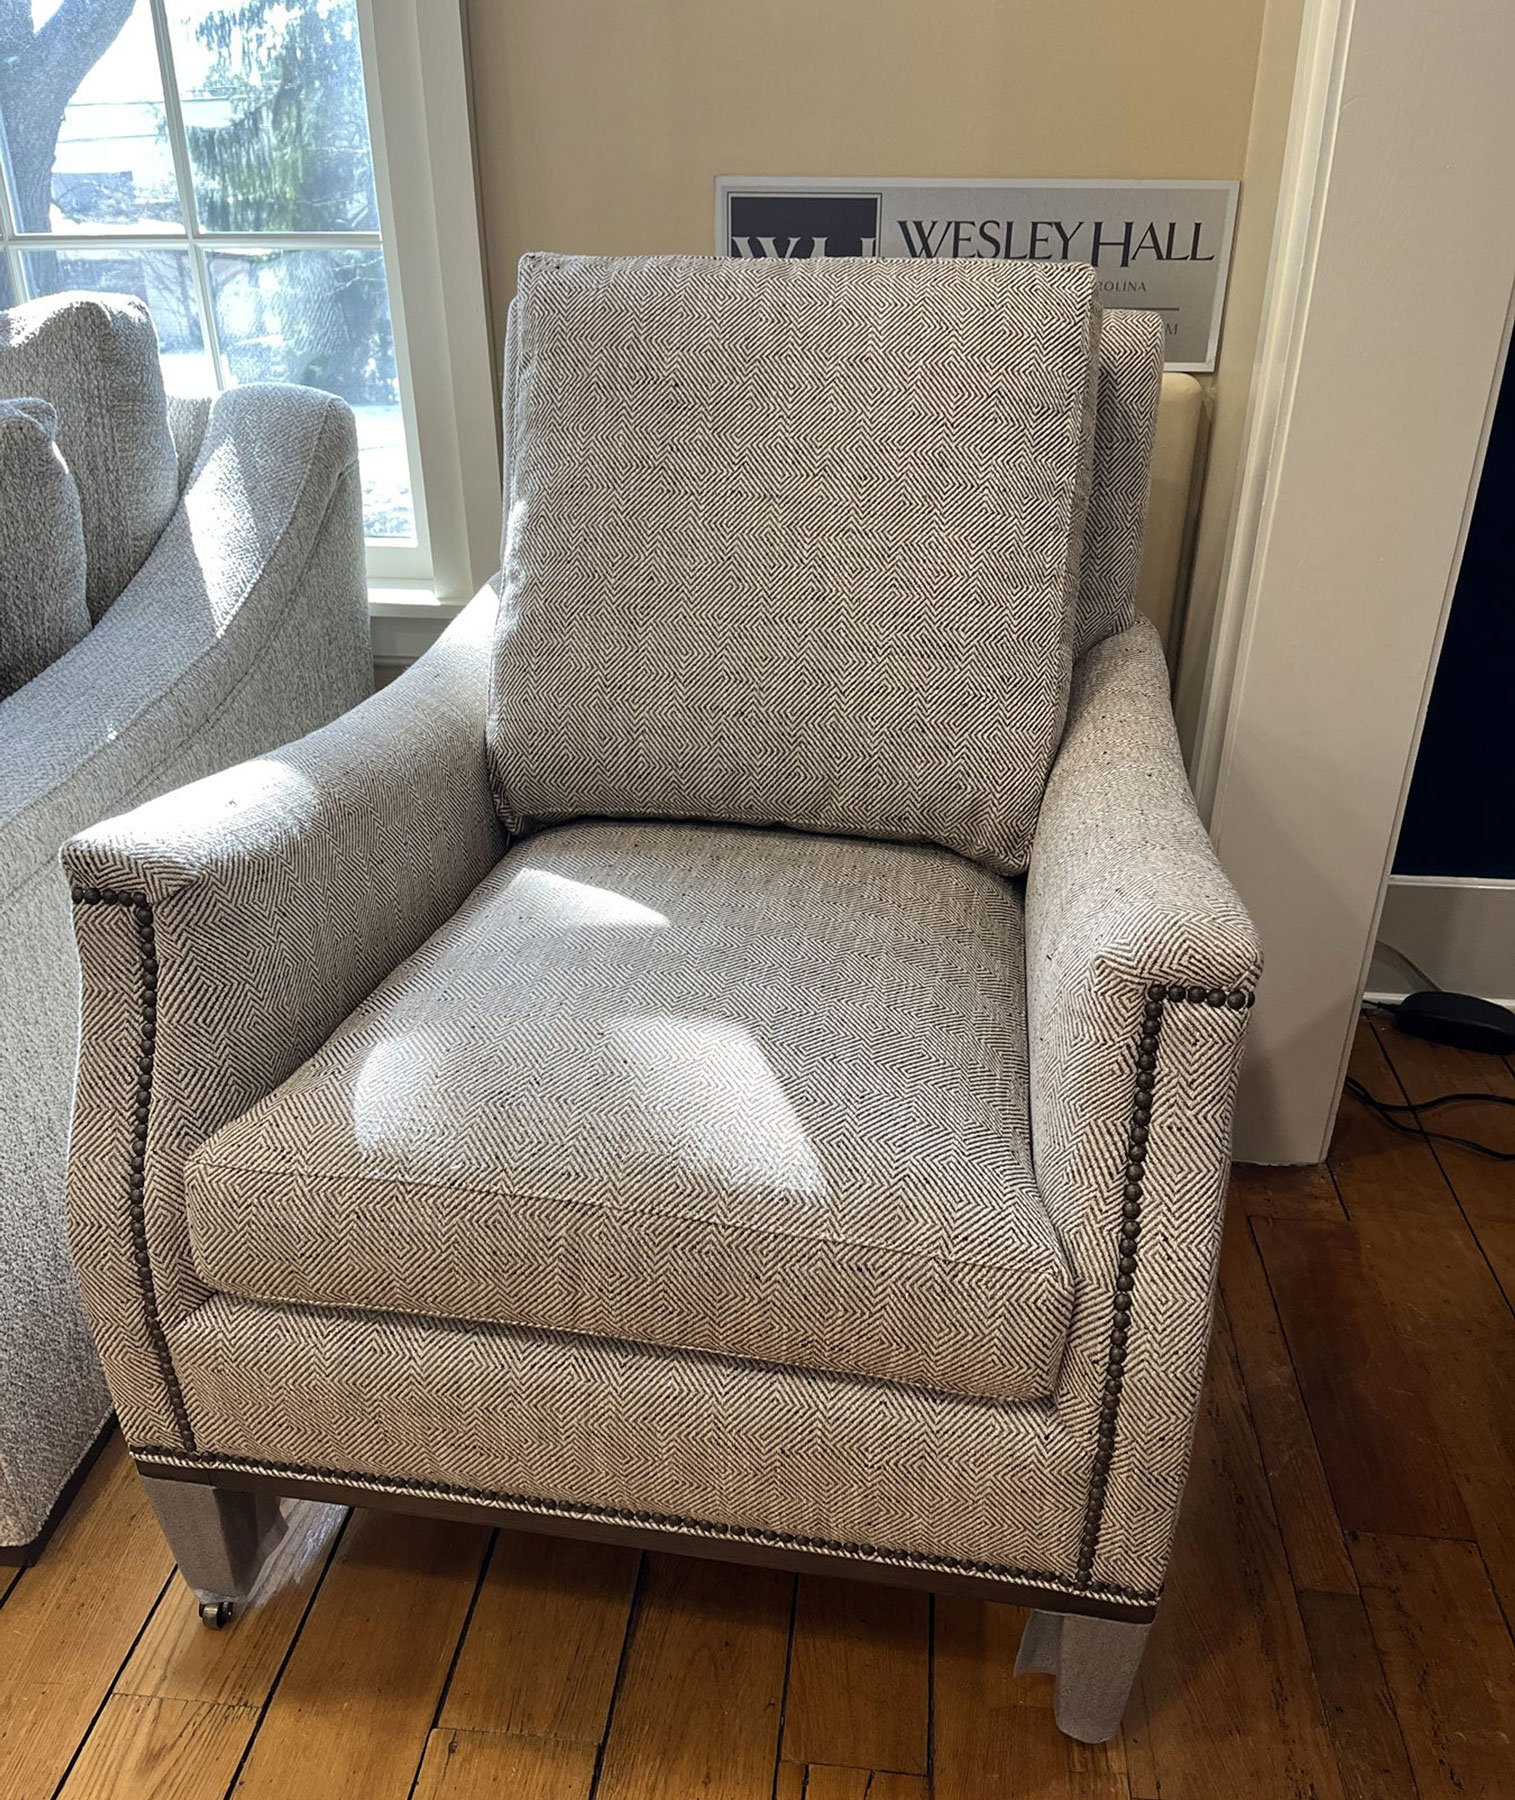 Wesley Hall 542 Galvin Lounge Chair in Belfast Cocoa Fabric